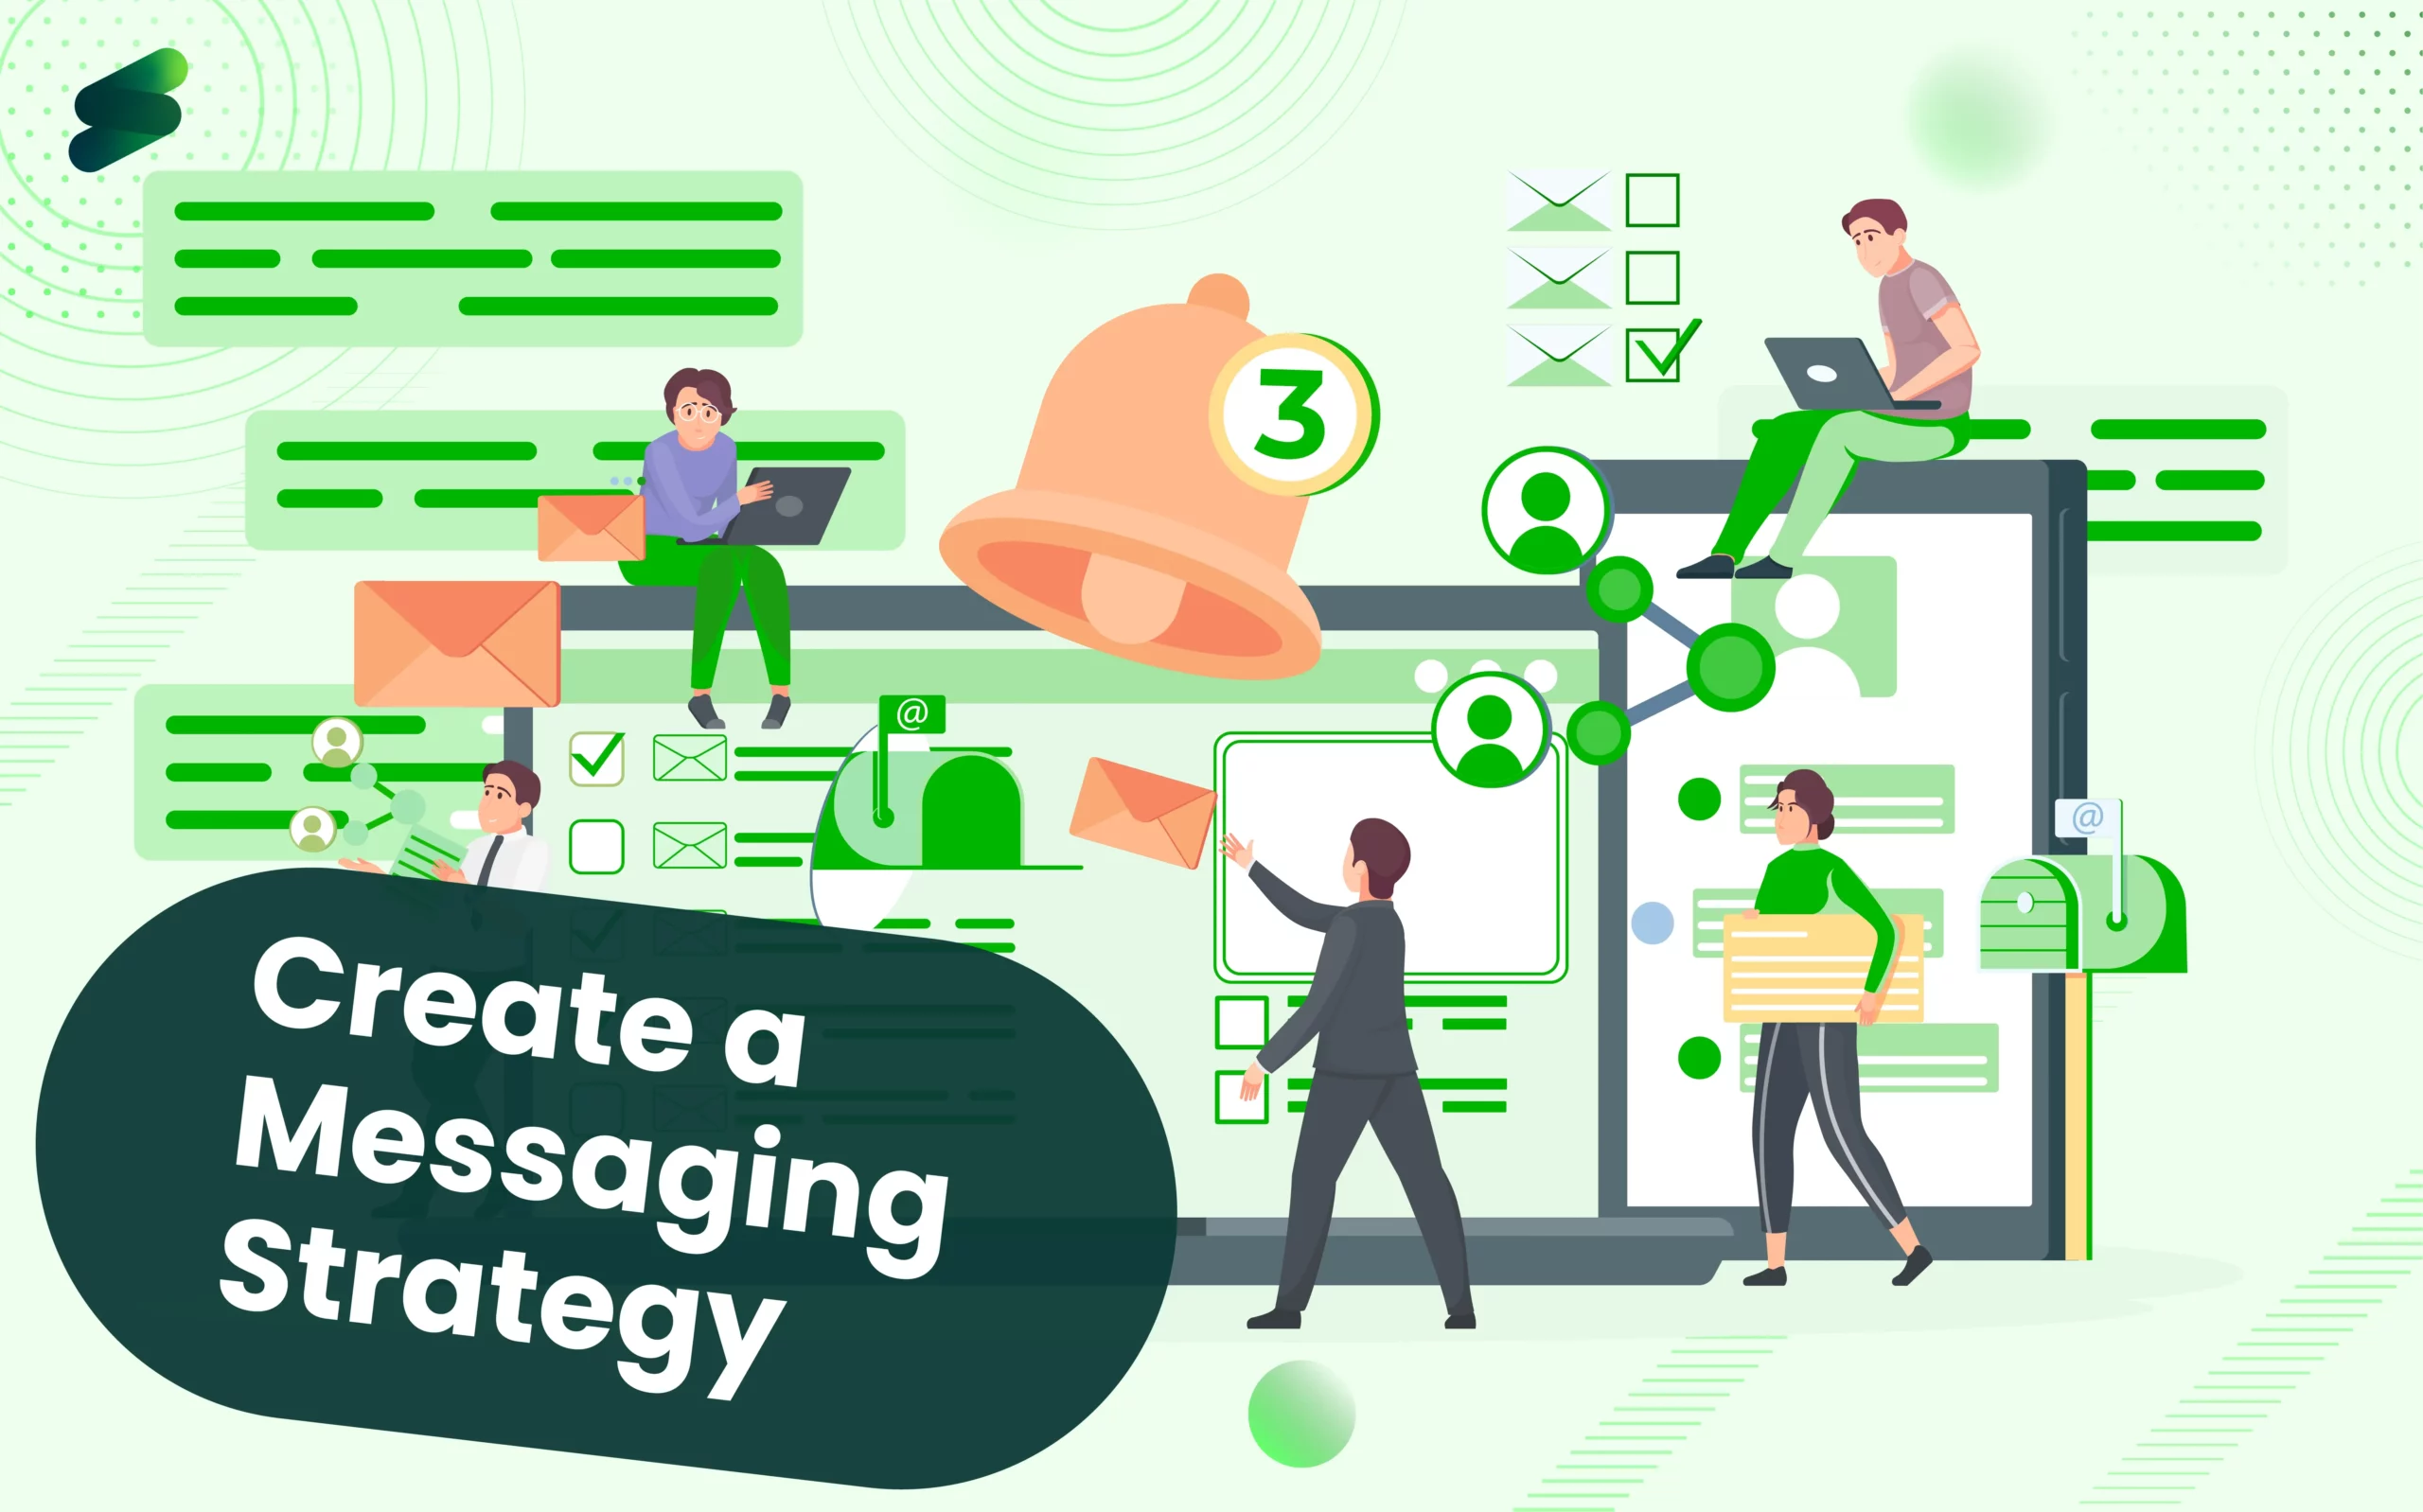 How to Create a Messaging Strategy